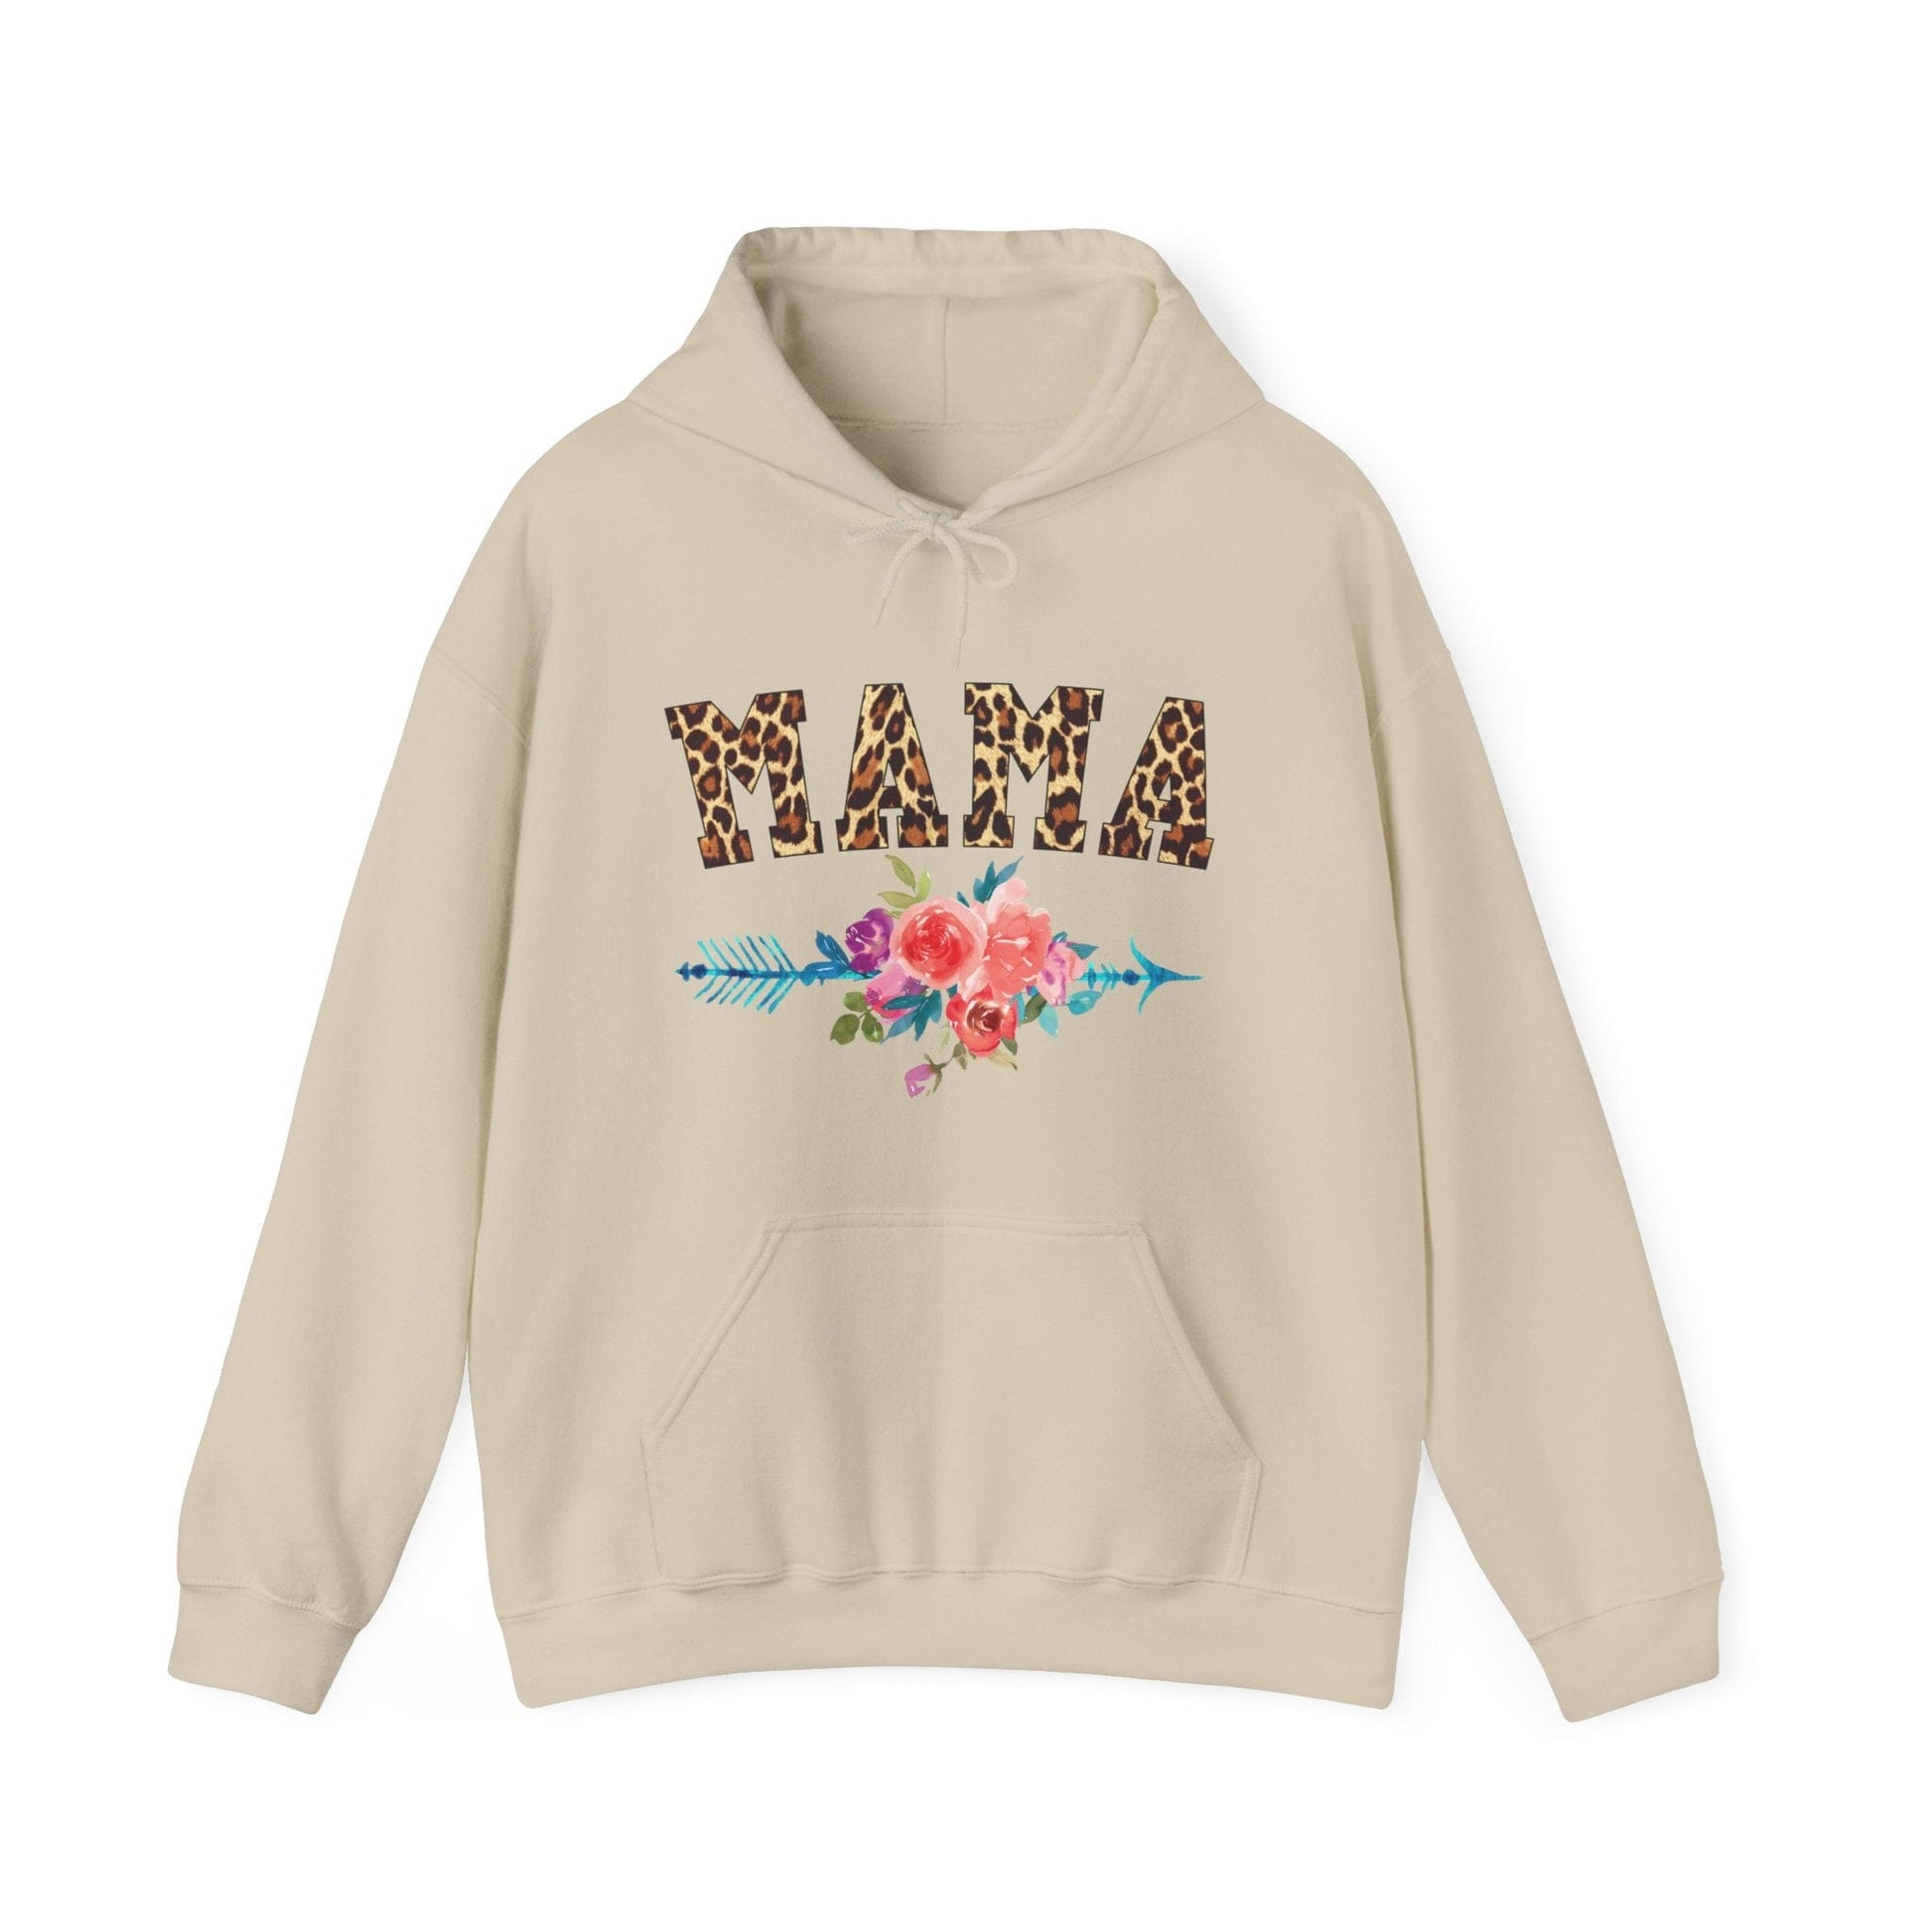 Celebrate motherhood with the 'Mama Arrow Flowers' hooded sweatshirt, featuring a beautiful blend of floral design and modern typography, a warm Mother's Day gift for cherished moms – available now at D1gital Emporium US.